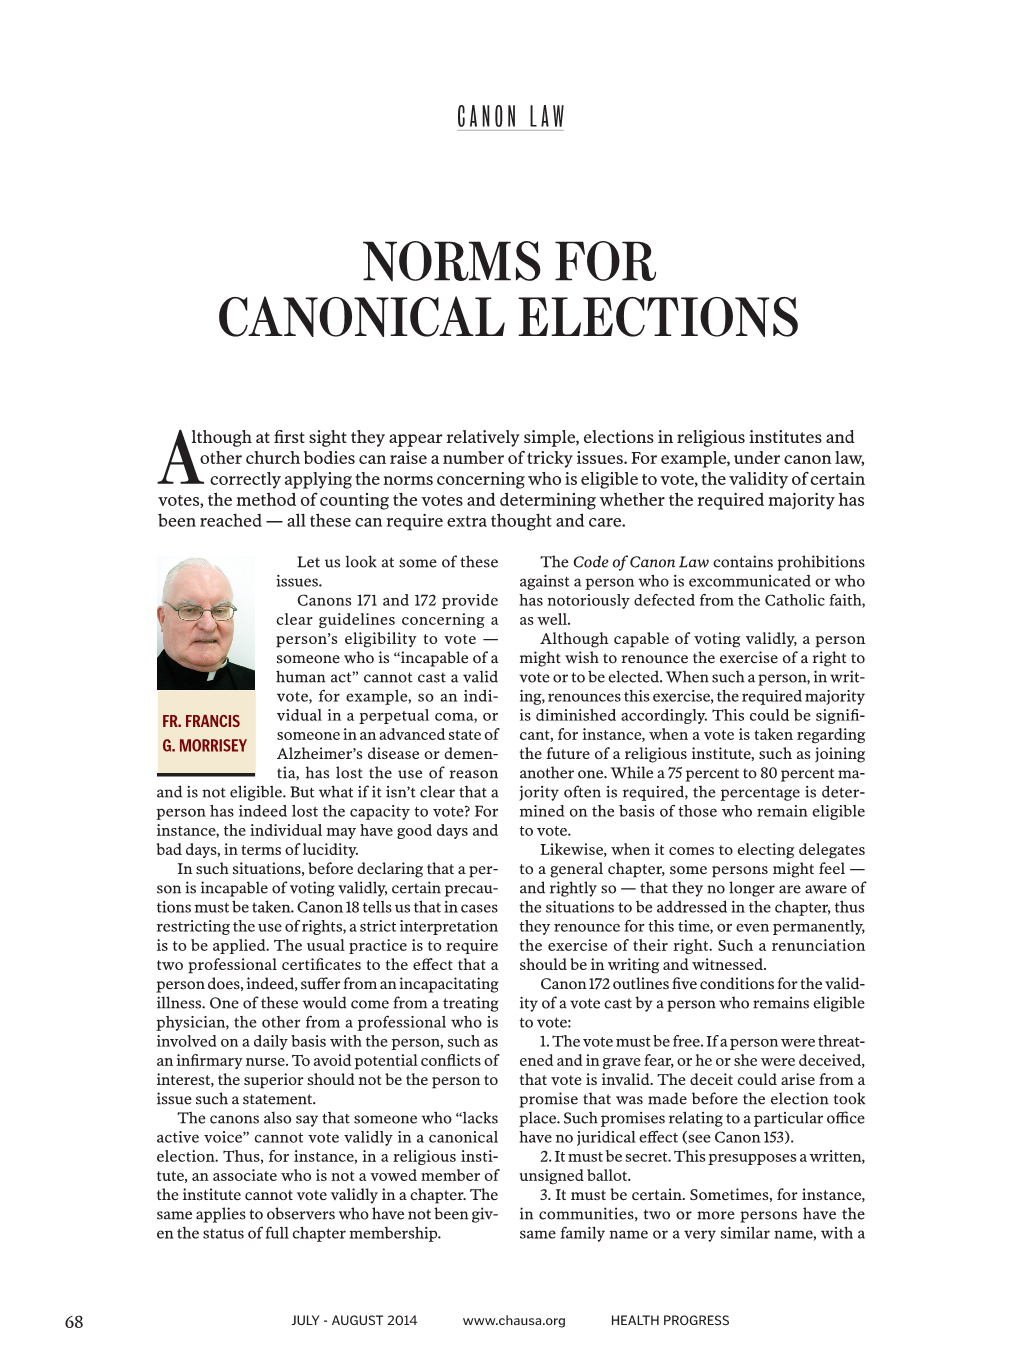 Canon Law-Norms for Canonical Elections